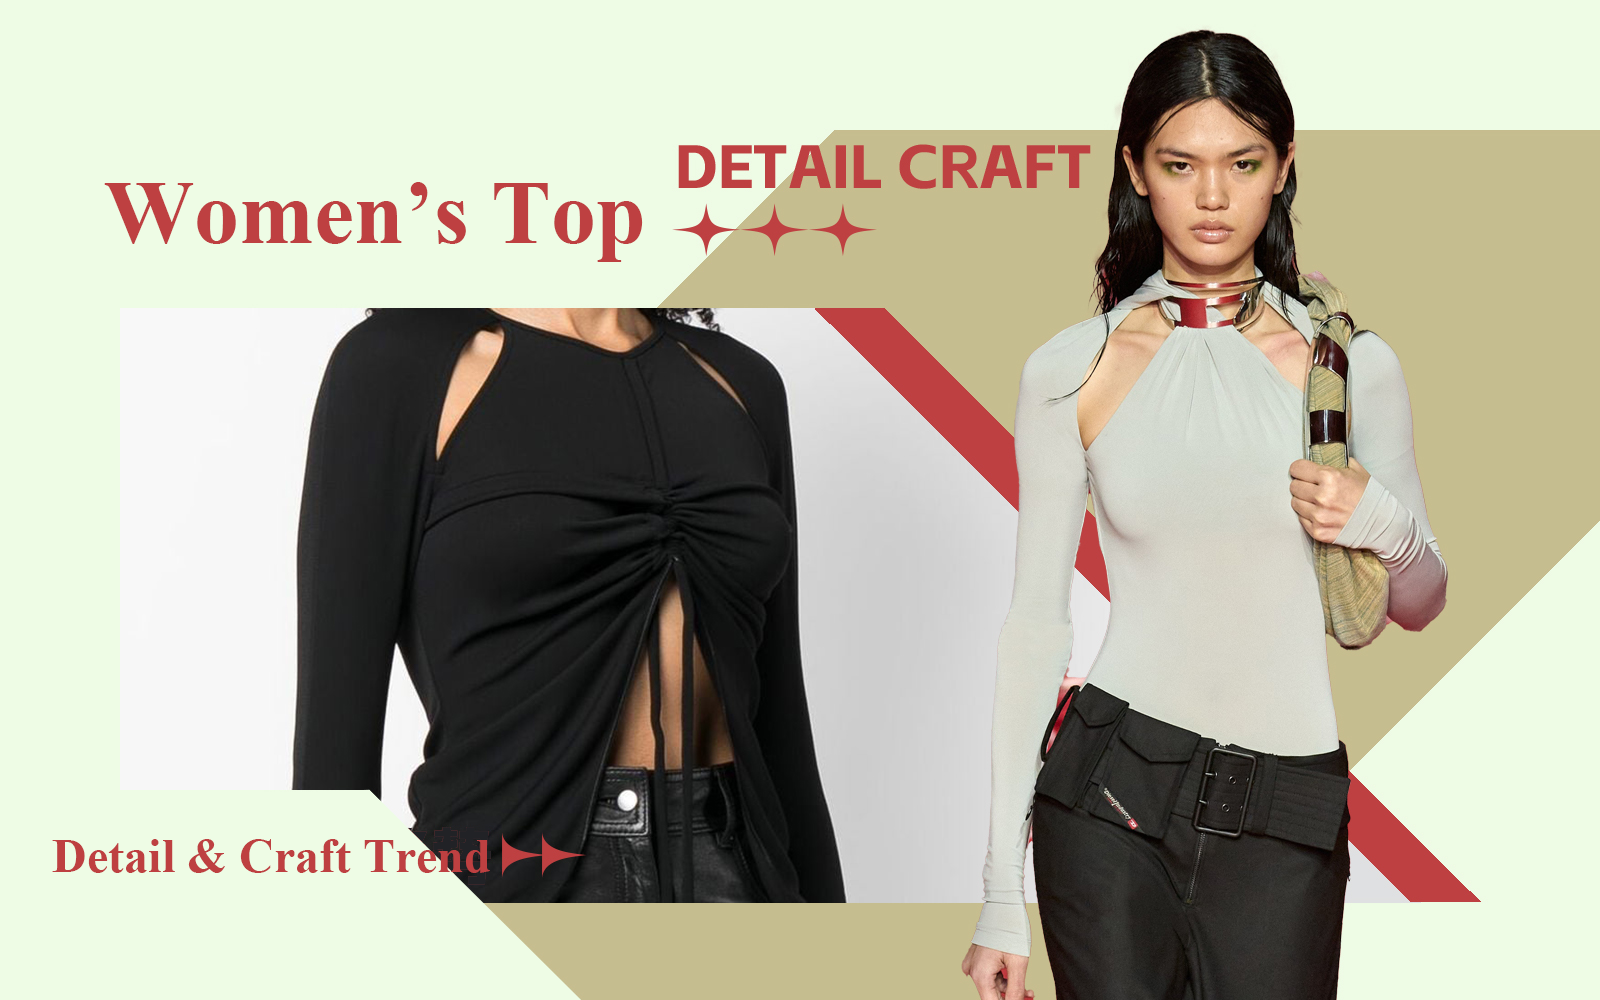 The Detail & Craft Trend for Women's Top